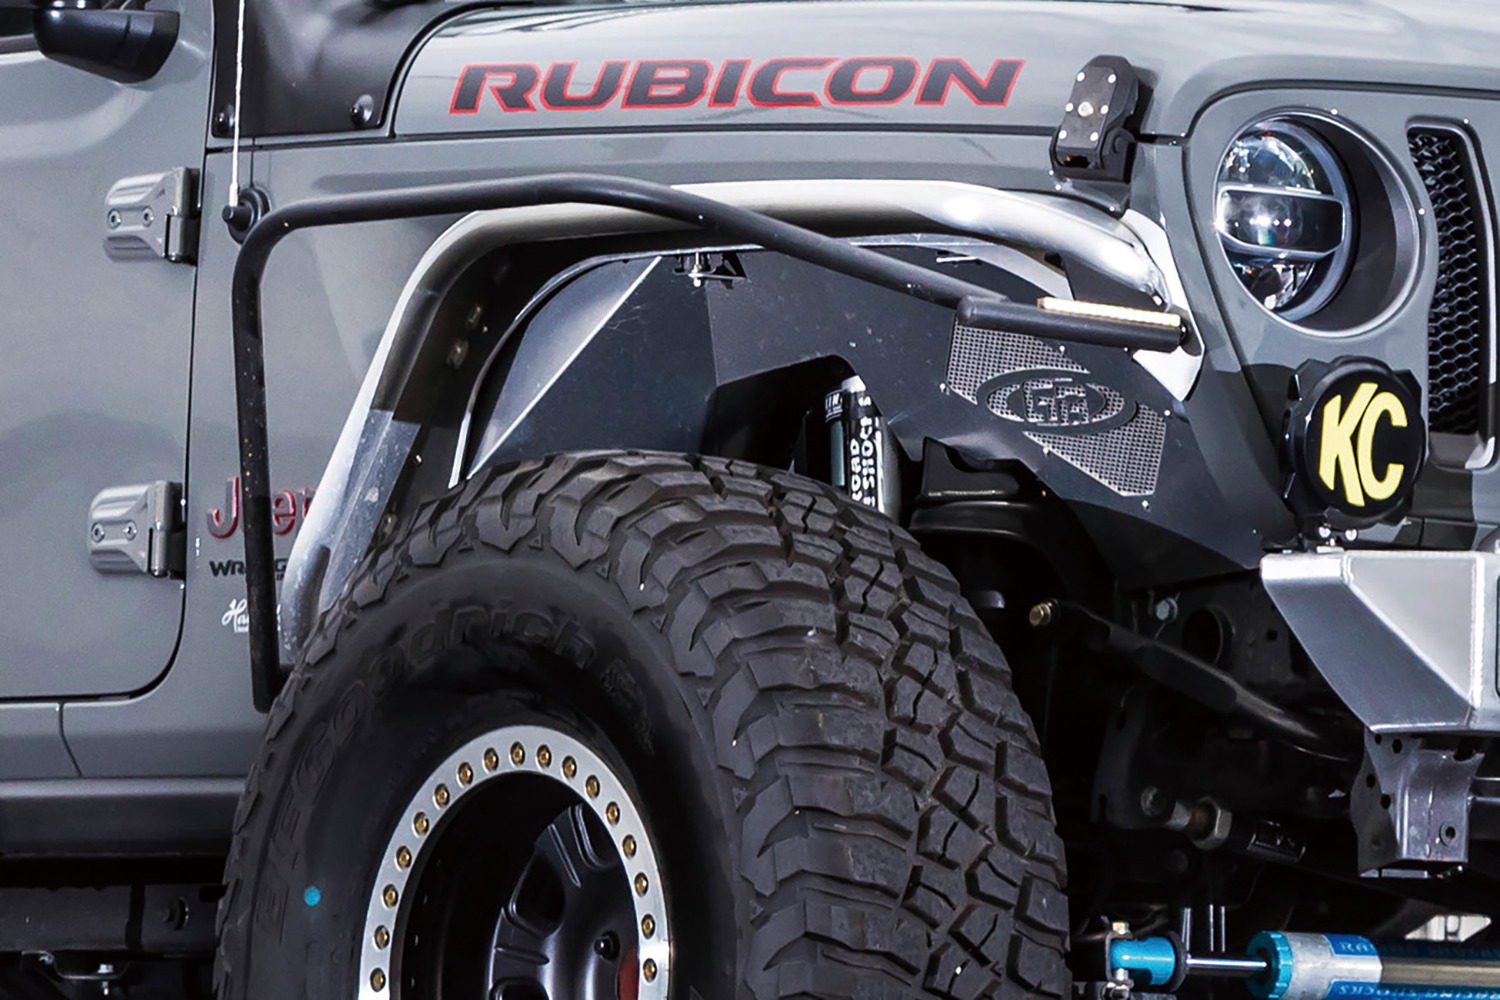 2020 JEEP Wrangler Unlimited RUBICON by Hall Shot